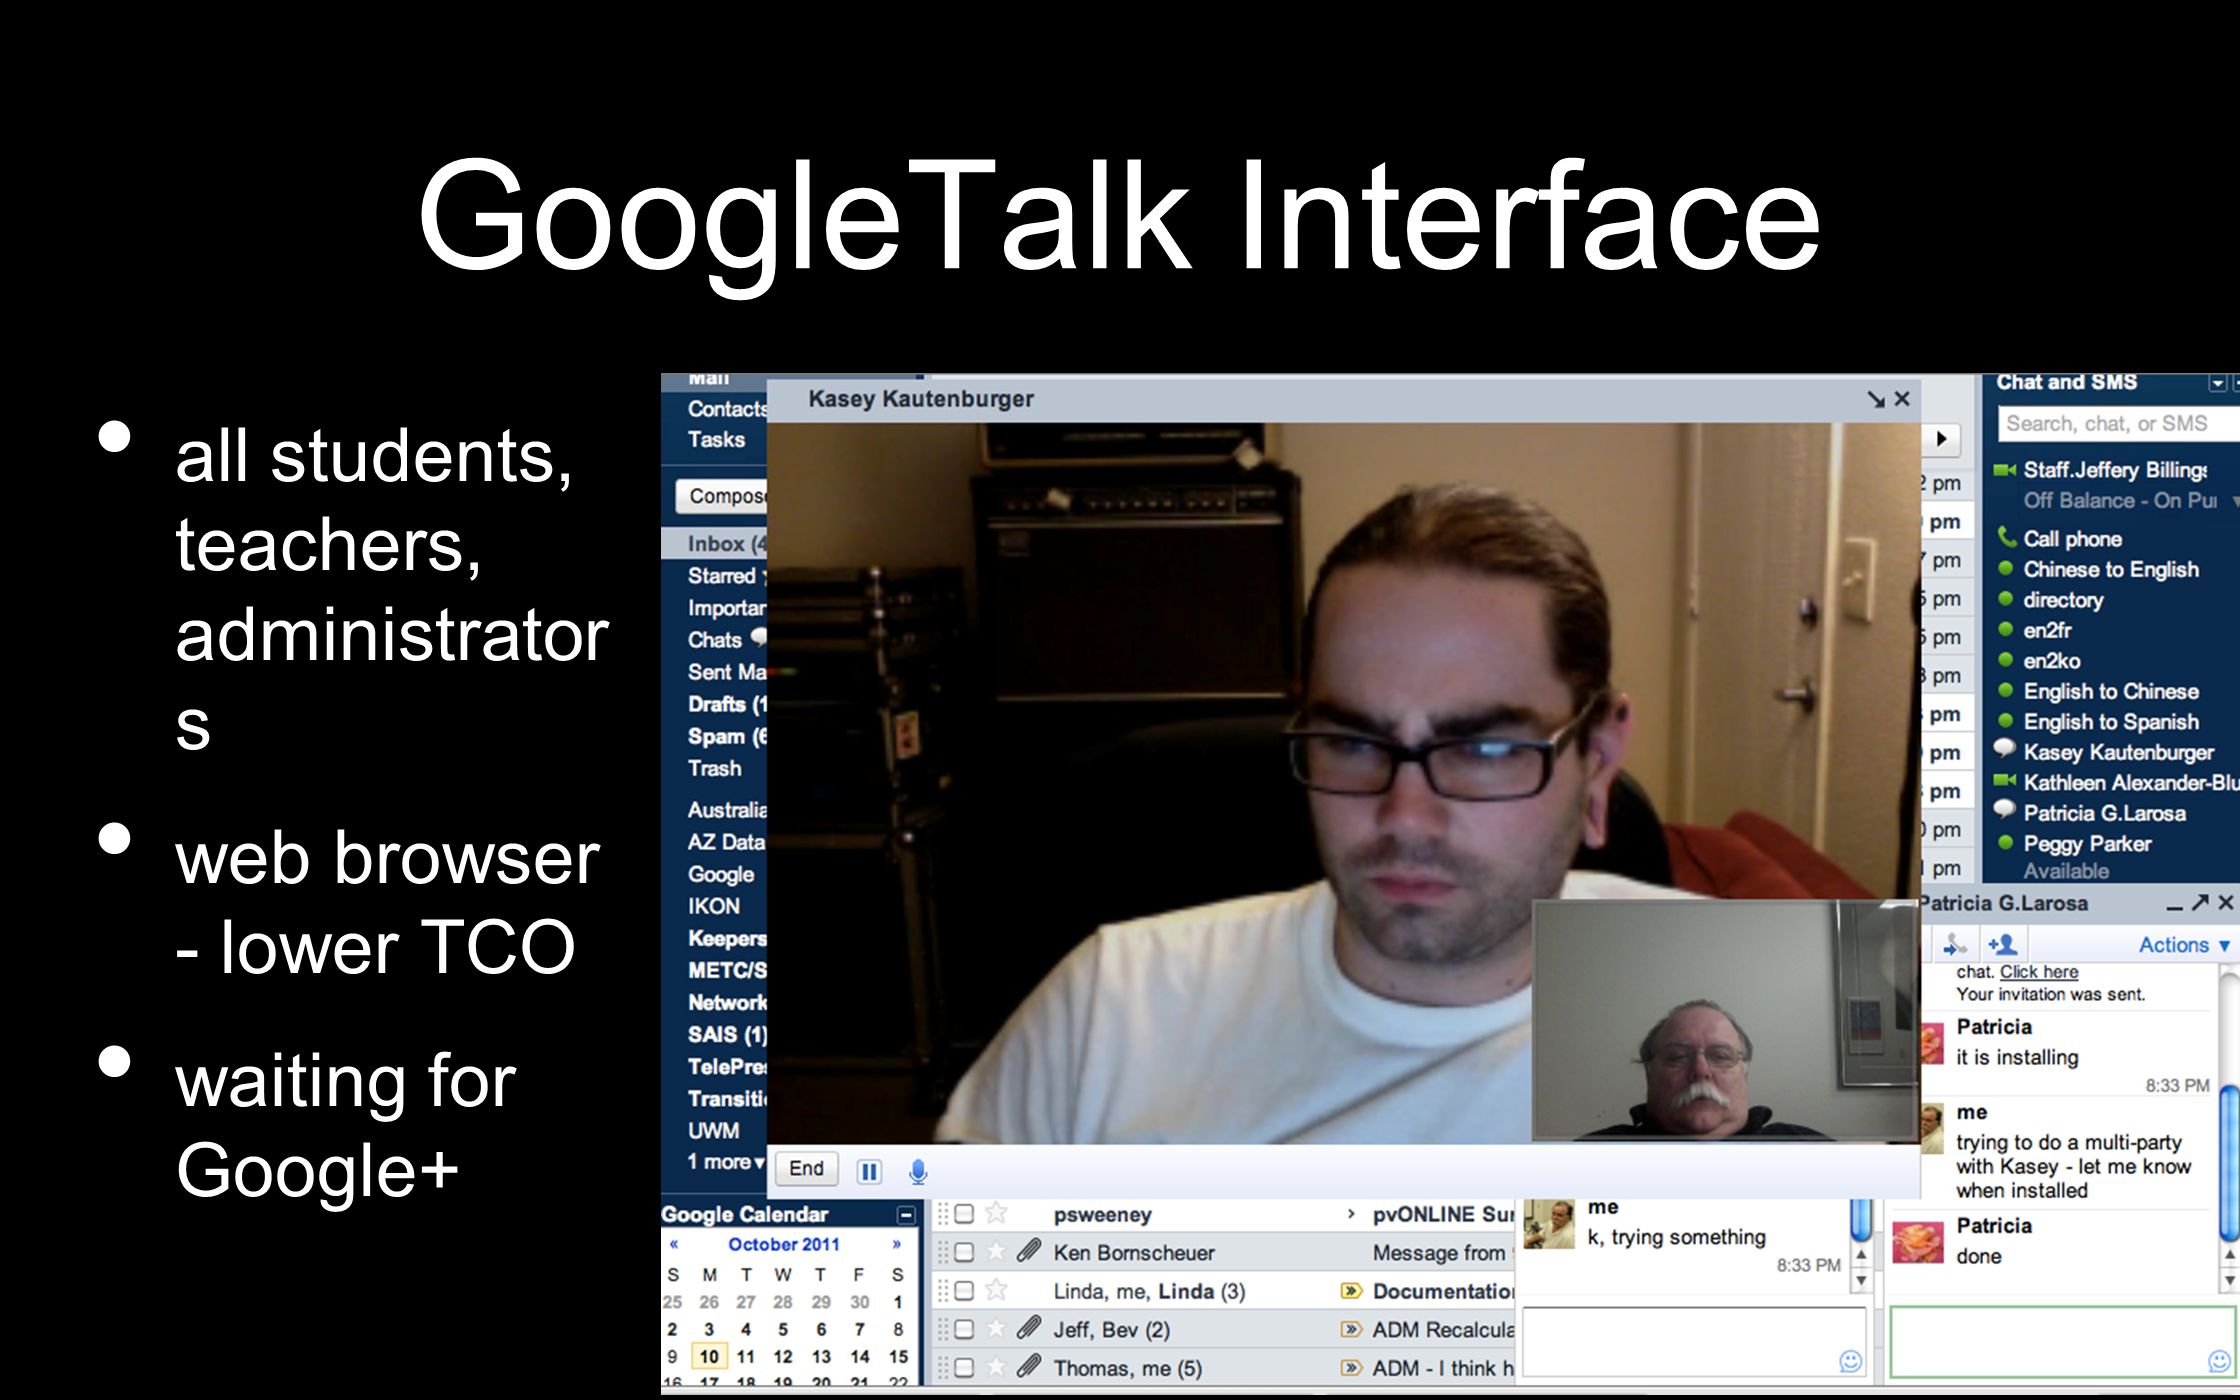 GoogleTalk Interface all students, teachers, administrator s web browser - lower TCO waiting for Google+